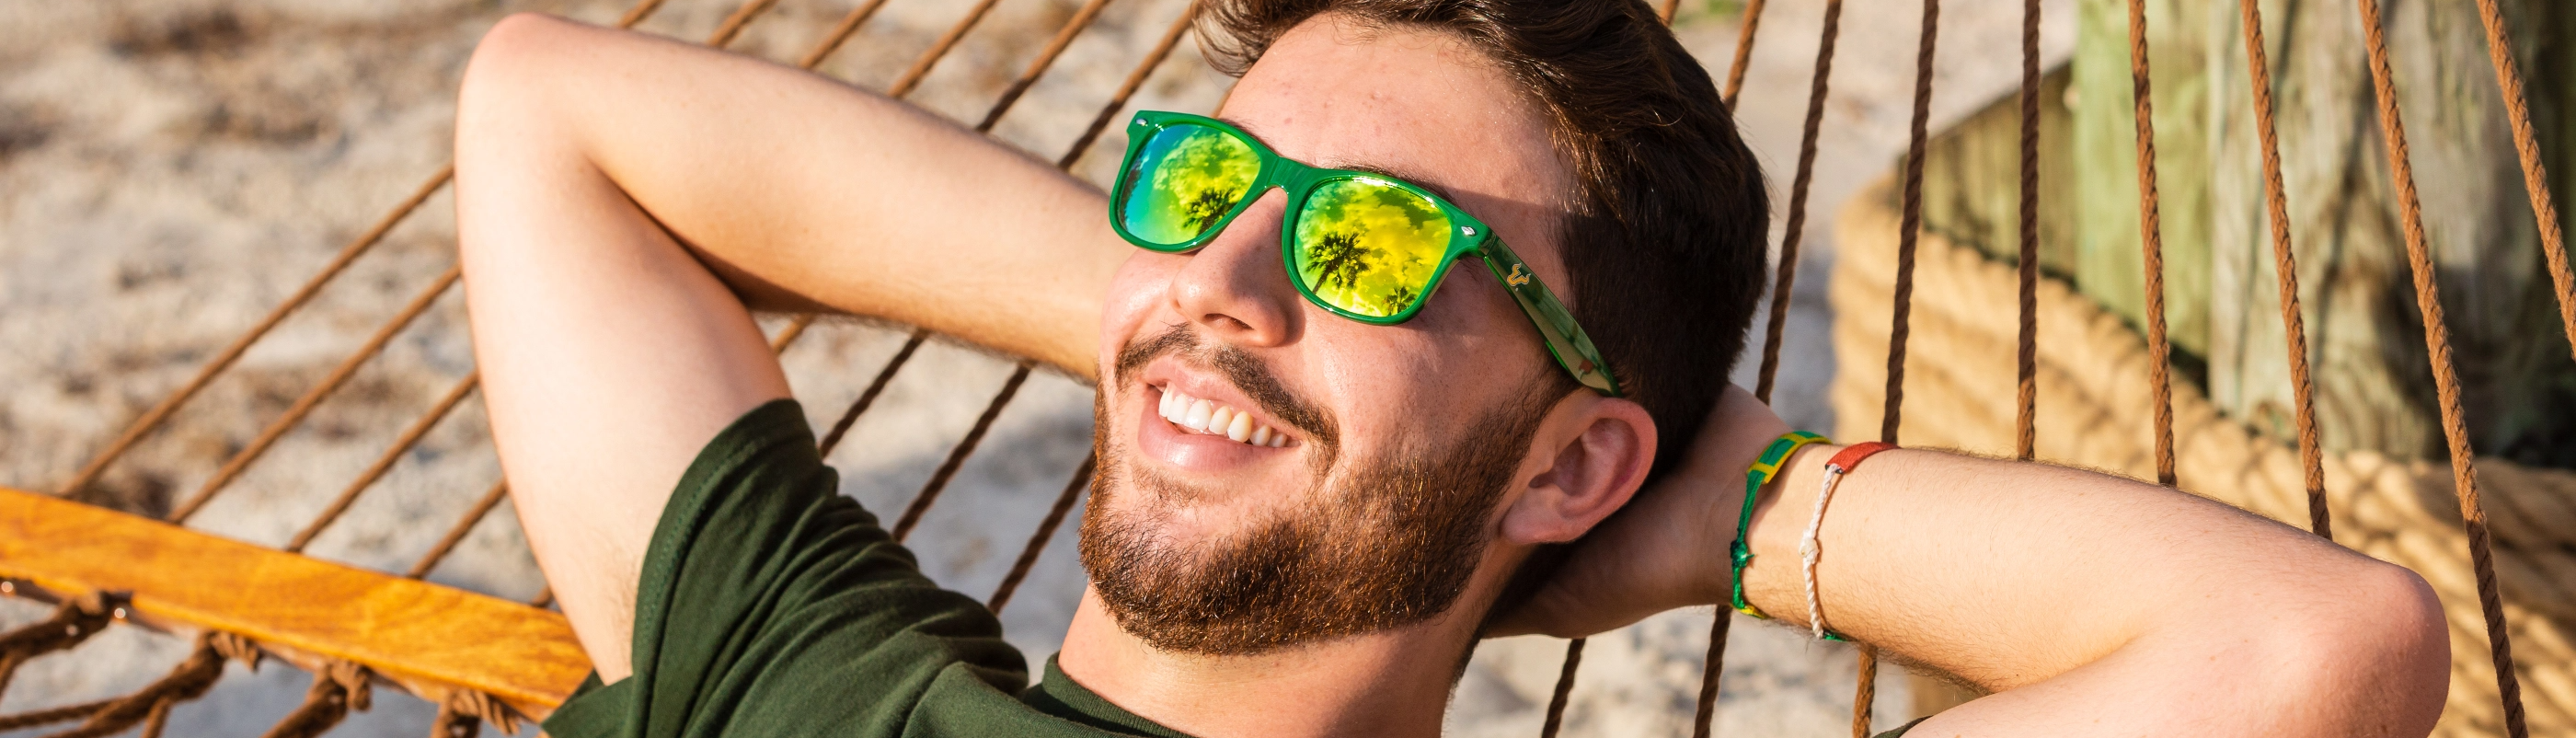 A USF student wearing sunglasses and smiling.